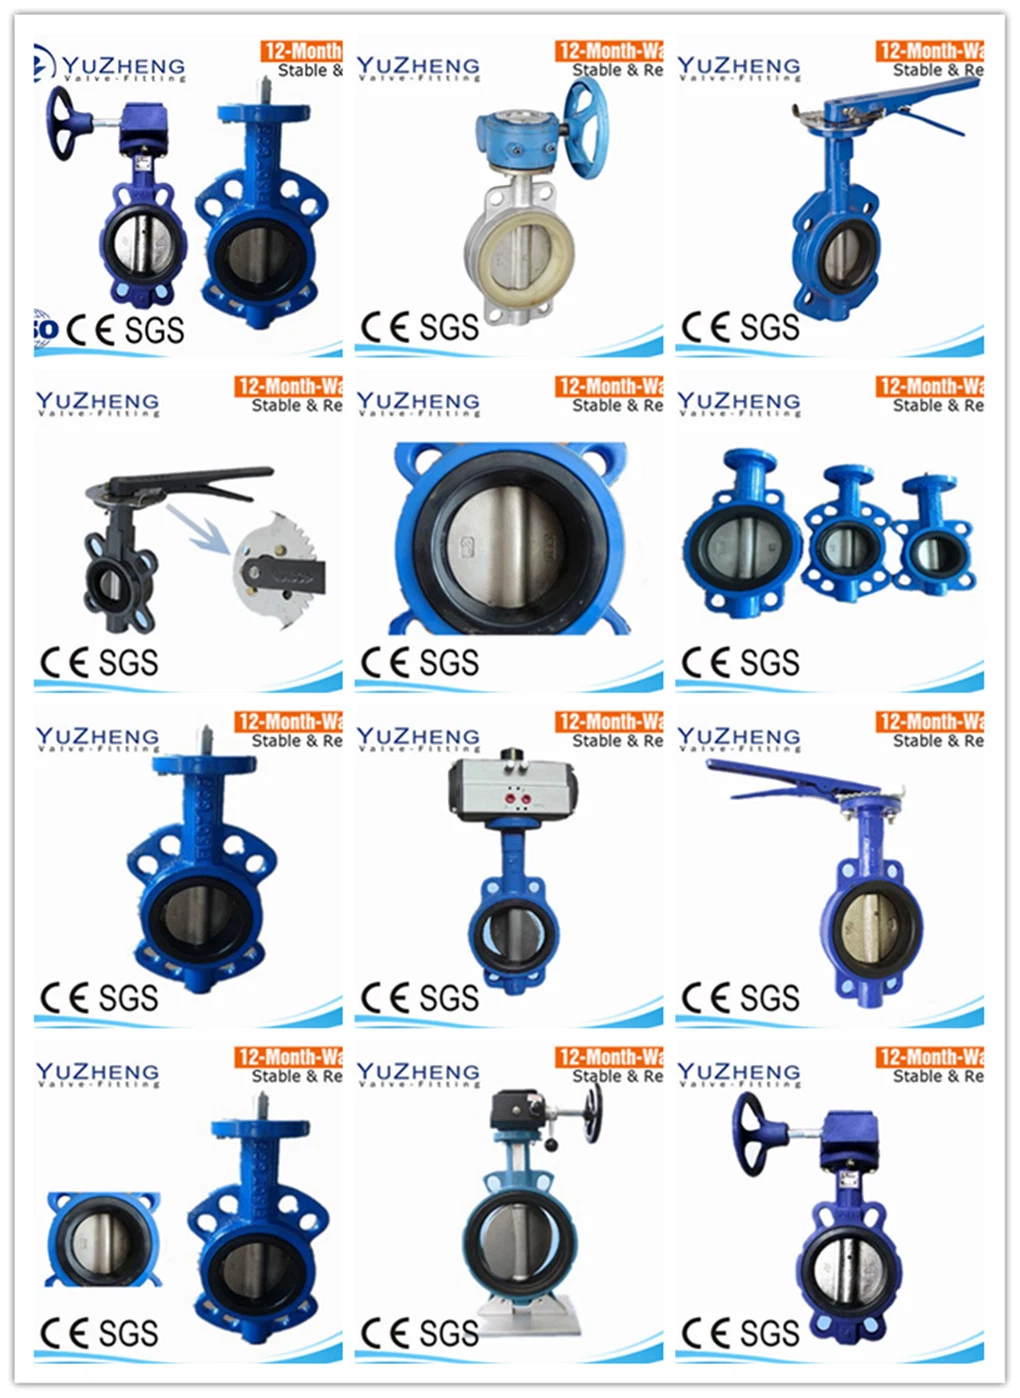 Compressed Air Operated Pneumatic Actuator Type Flange Ball Valve